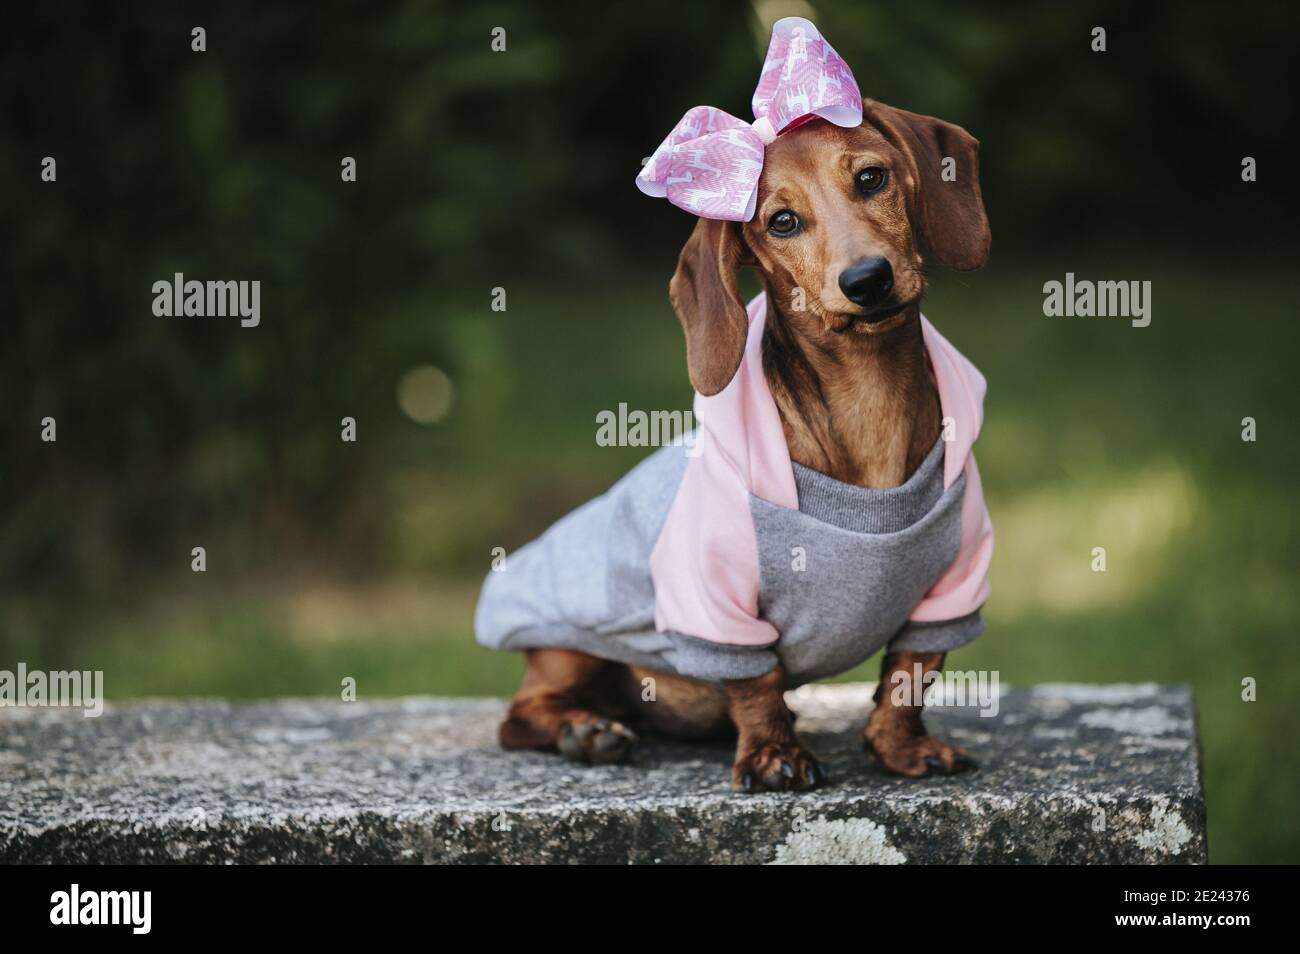 weet brown dwarf dachshund wearing a stylish pullover and pink headband posing in a park Stock Photo